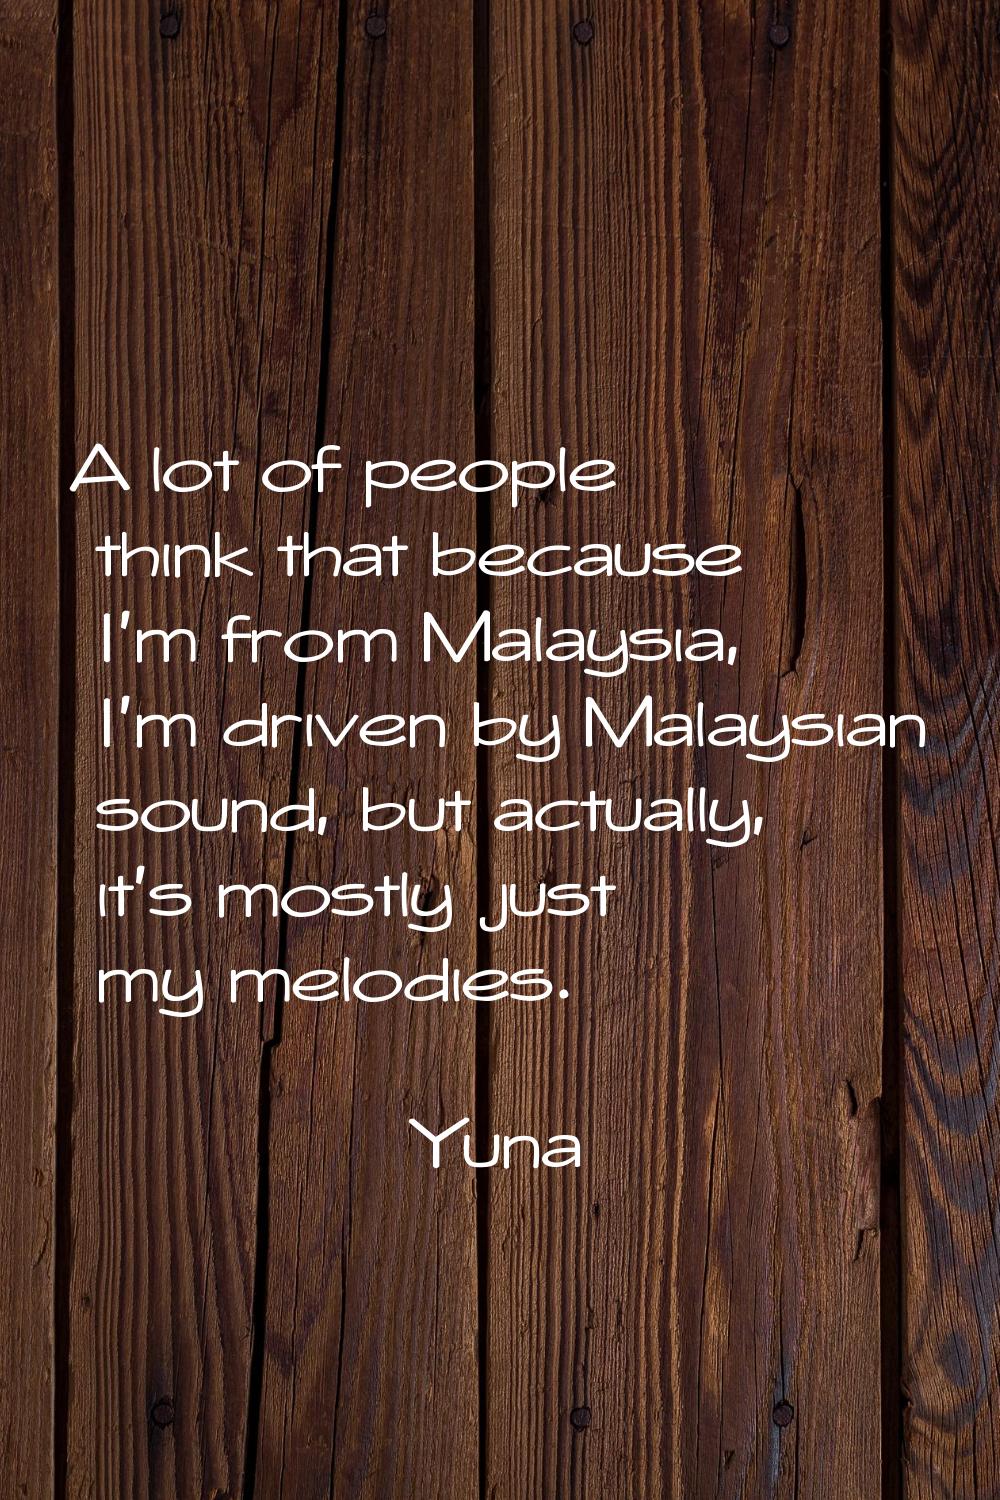 A lot of people think that because I'm from Malaysia, I'm driven by Malaysian sound, but actually, 